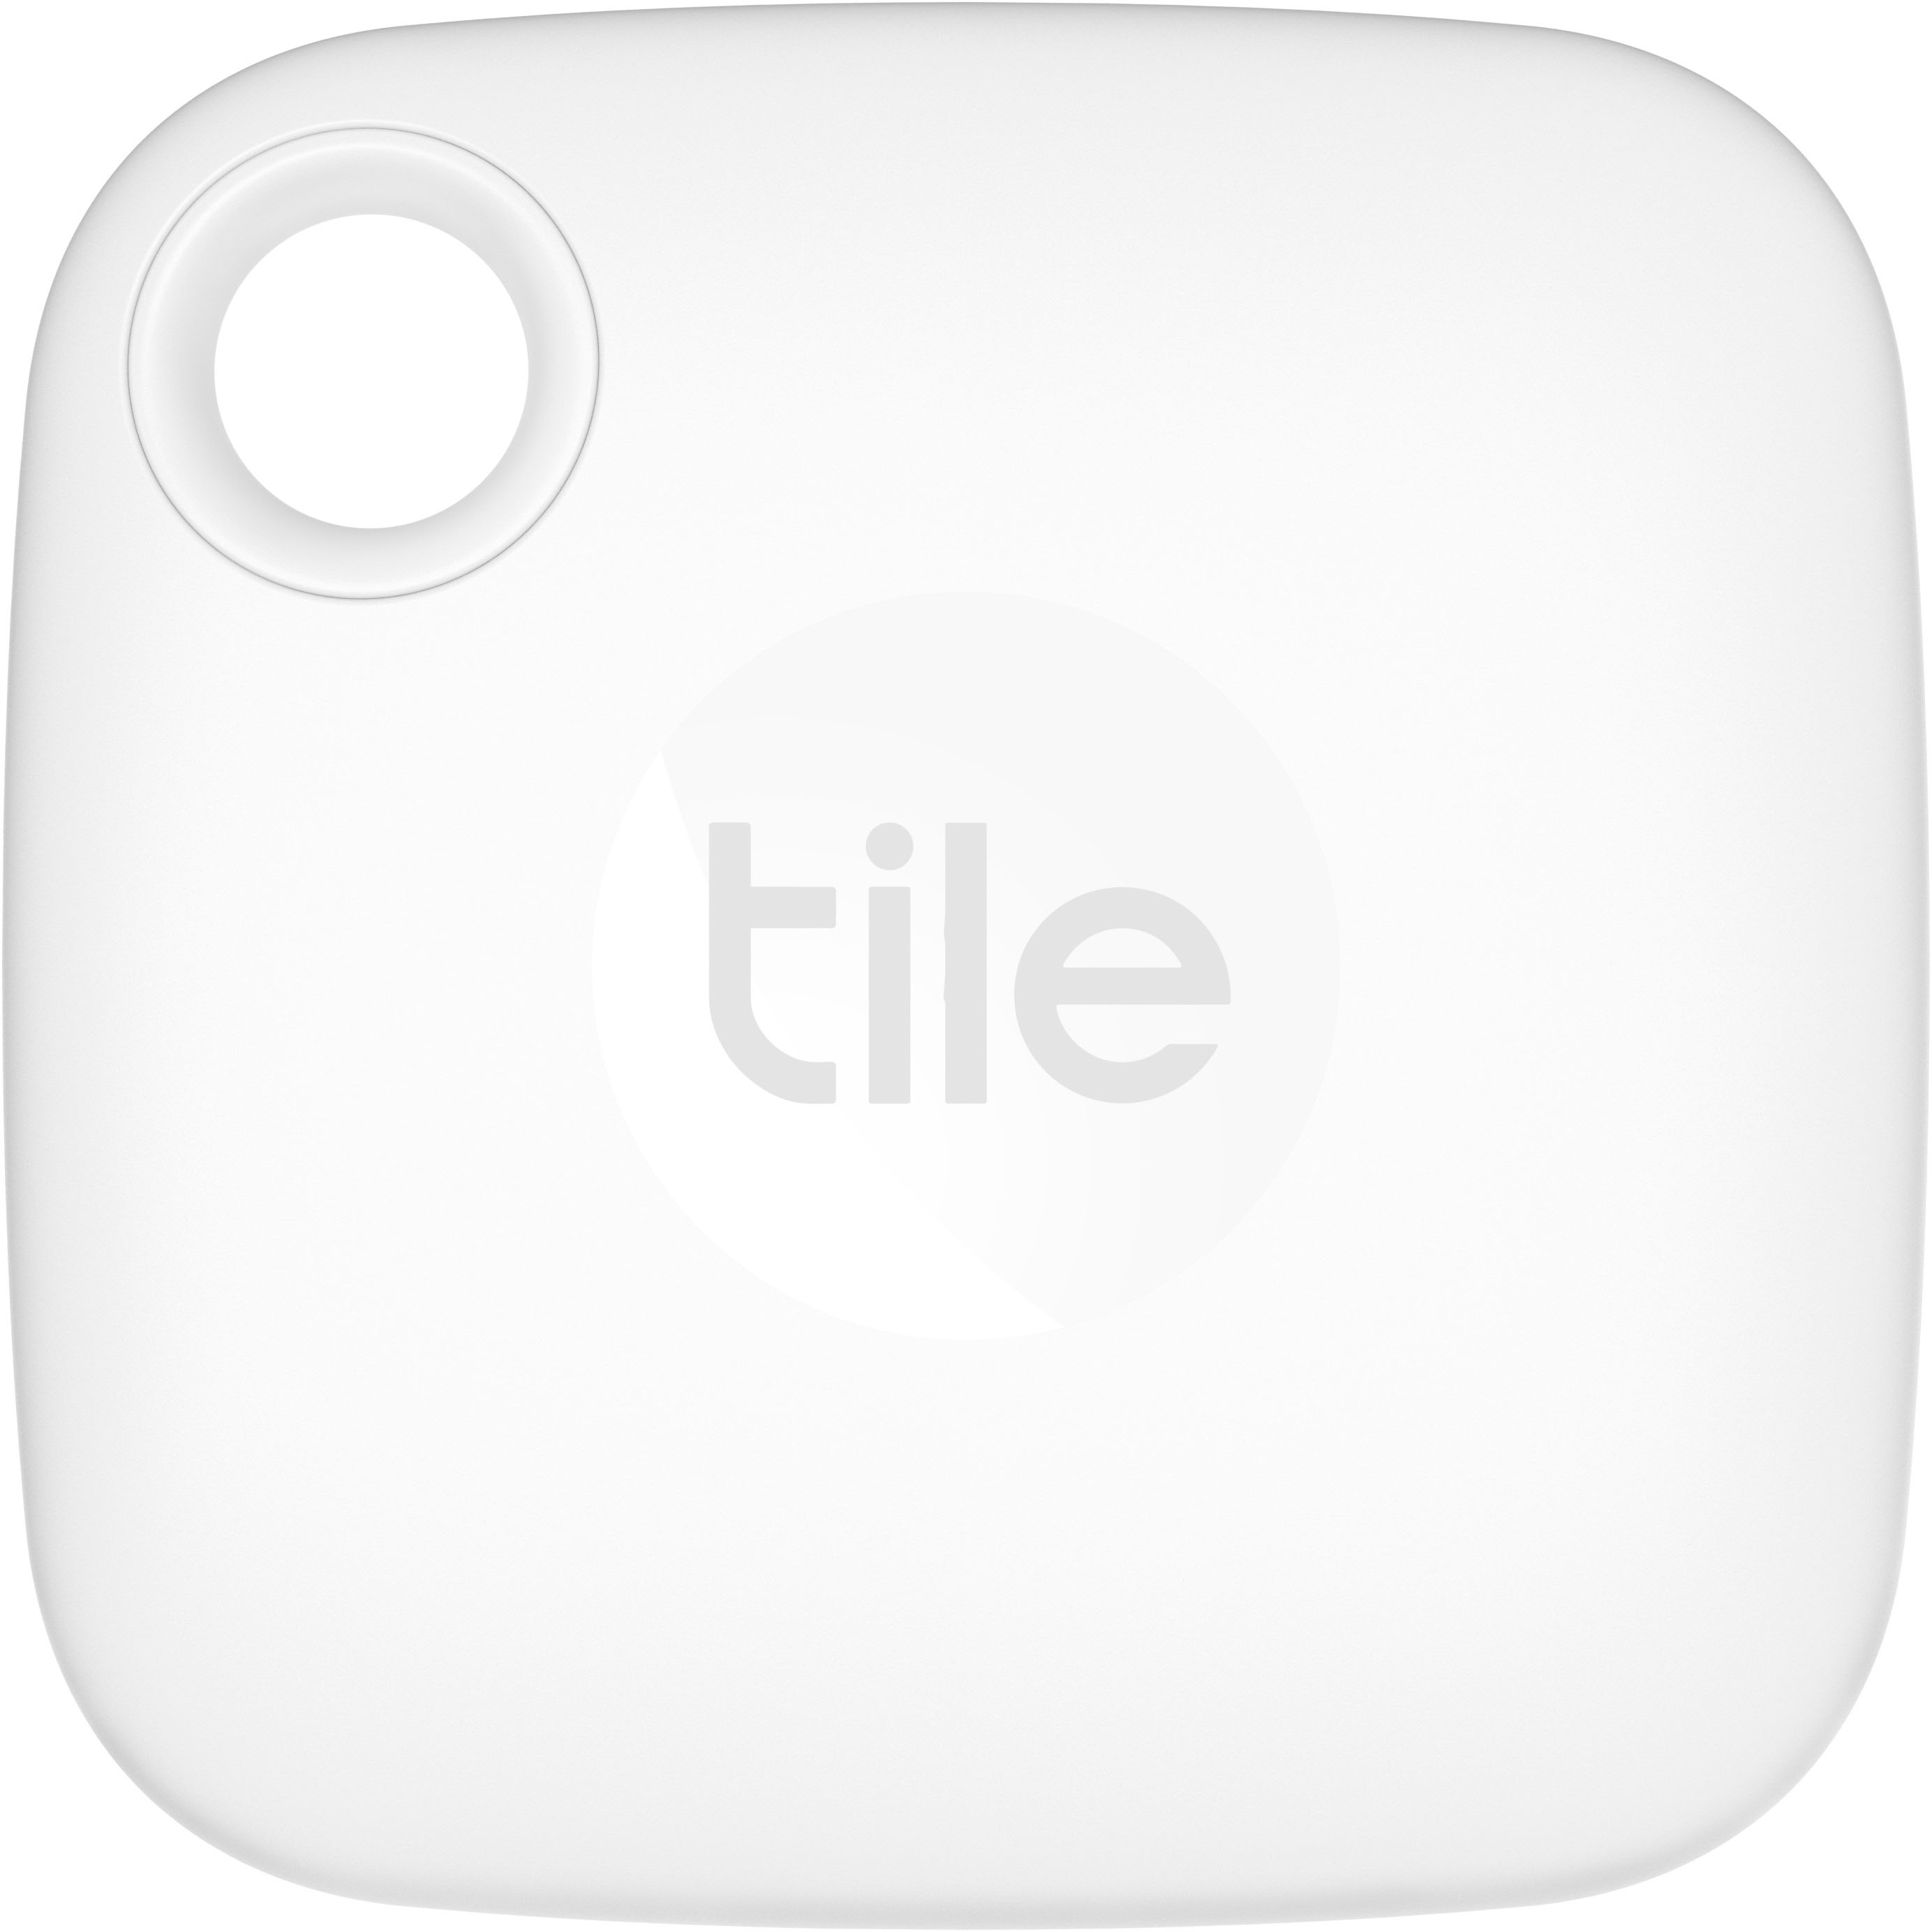 tile Tile Pro Black/White 2022 (2-Pack) Powerful Bluetooth Tracker, Keys  Finder and Item Locator for Keys, Bags and More RE-51002 - The Home Depot